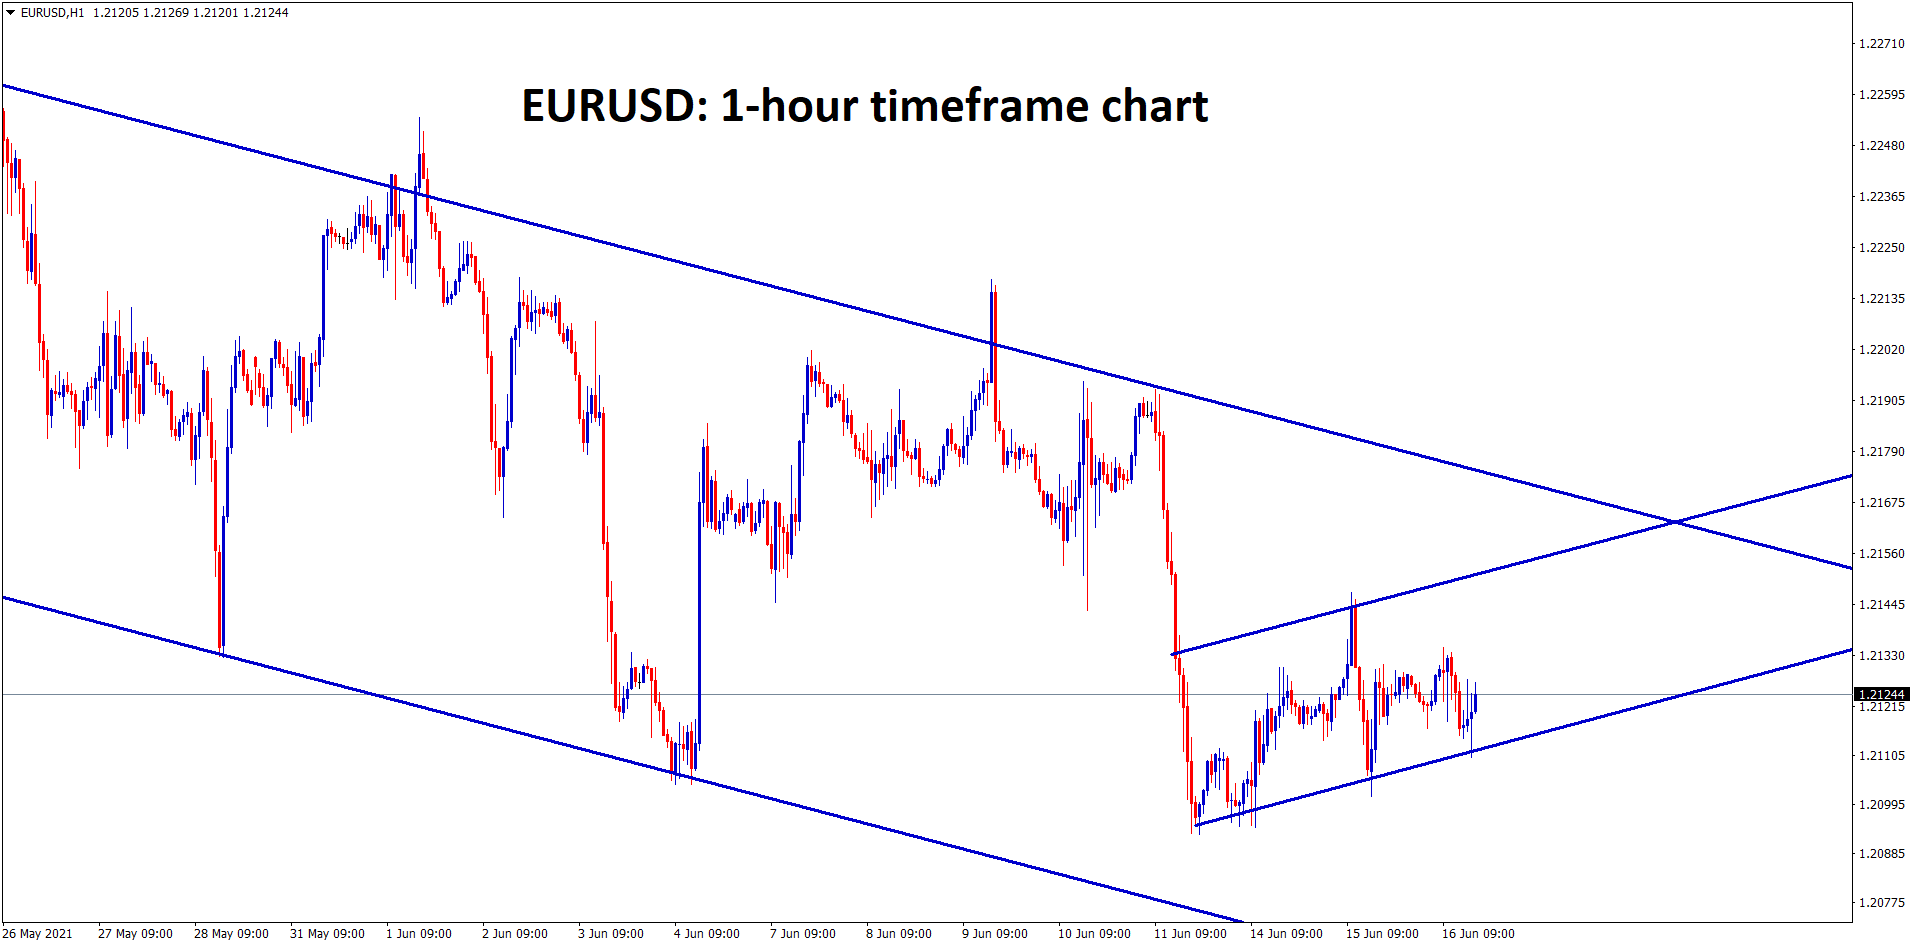 EURUSD is moving between the minor channel ranges